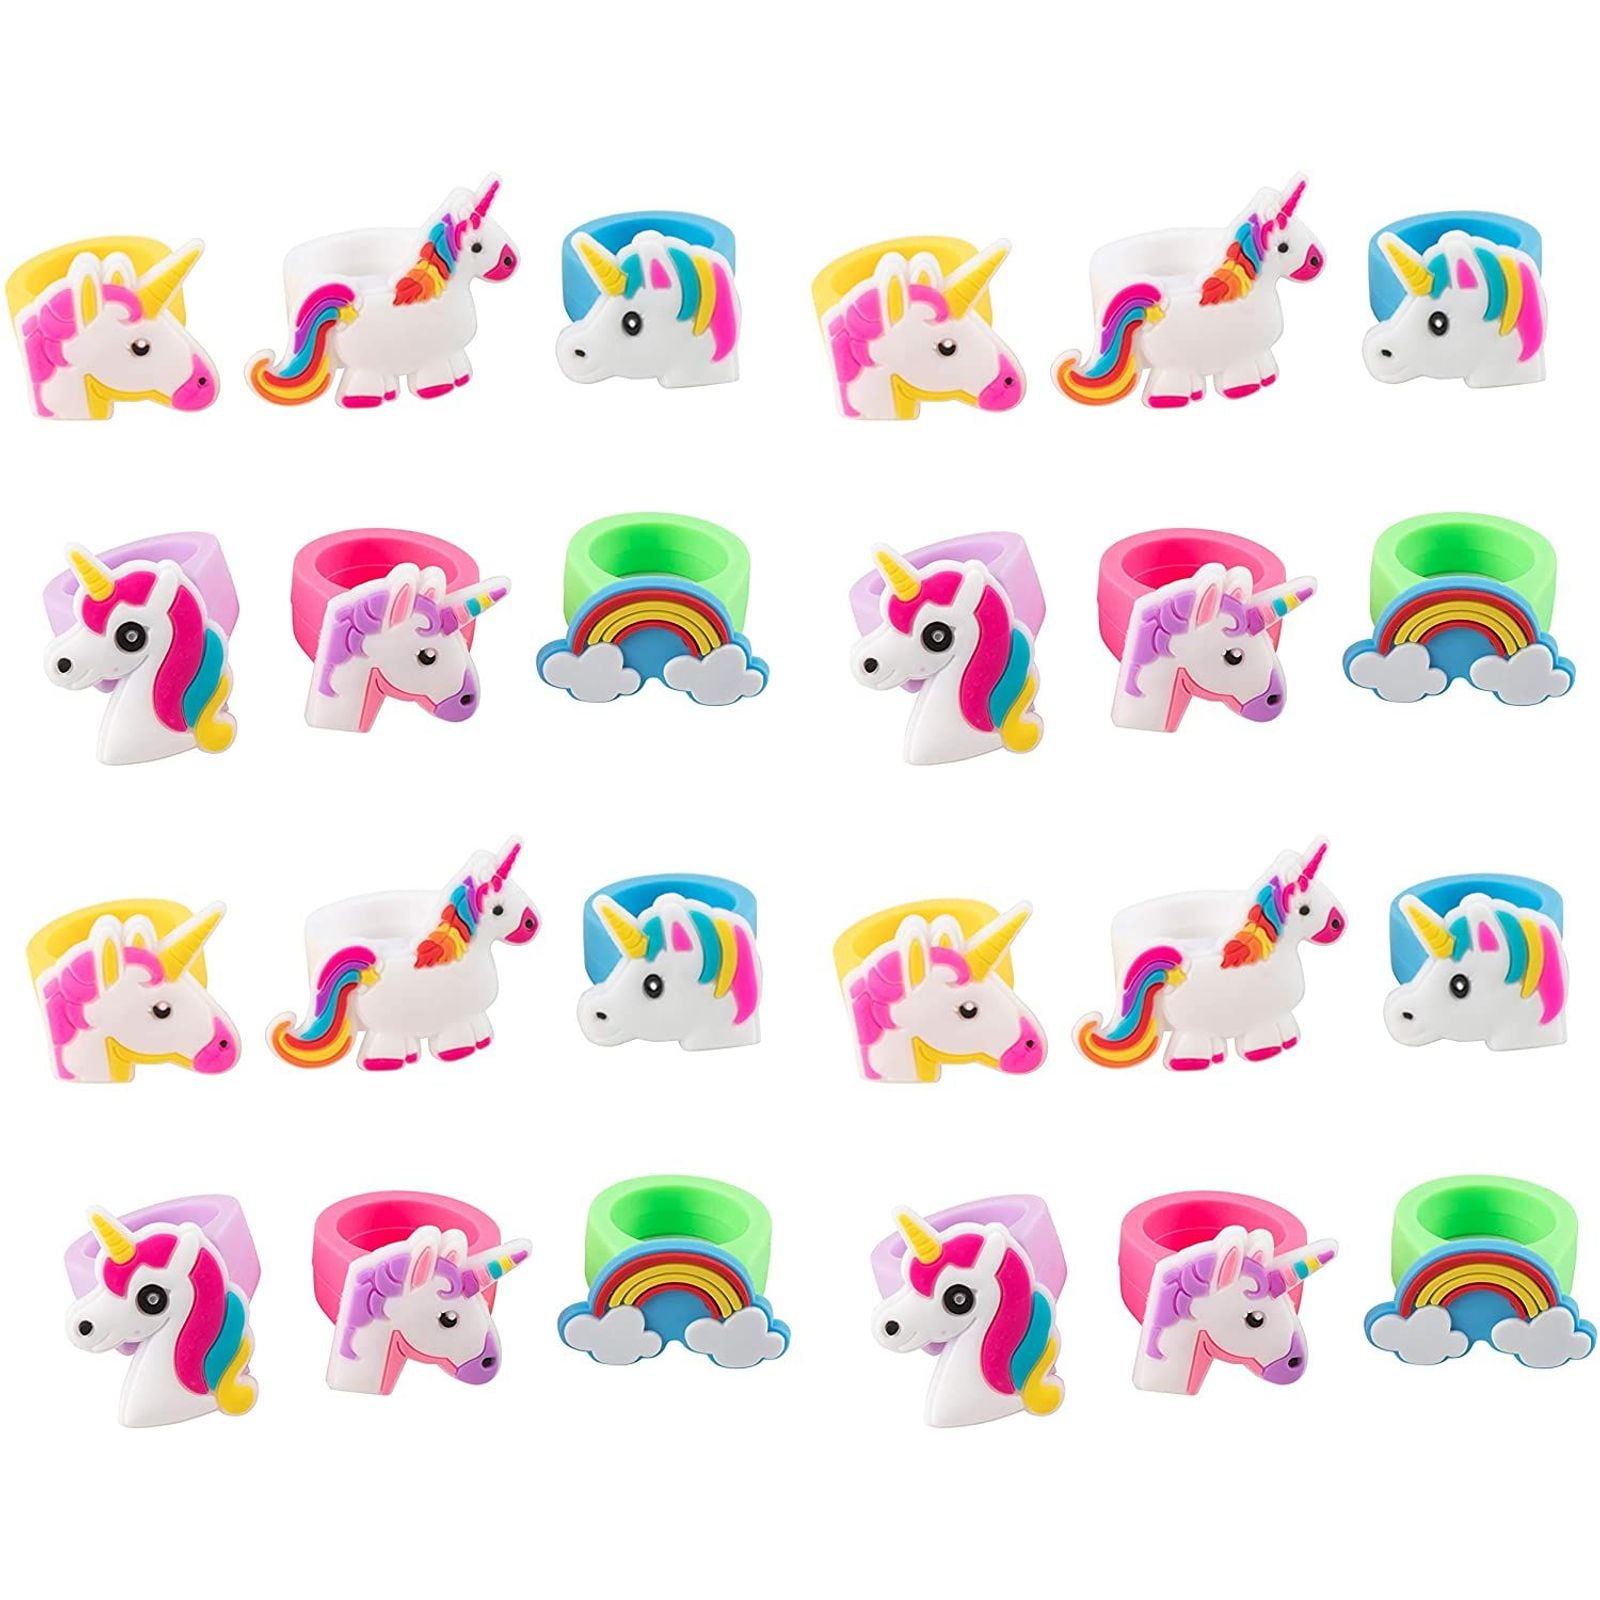 2 UNICORN RINGS GIRLS SILICON RUBBER TOYS FAVORS LOOT BIRTHDAY PARTY BAG FILLERS 